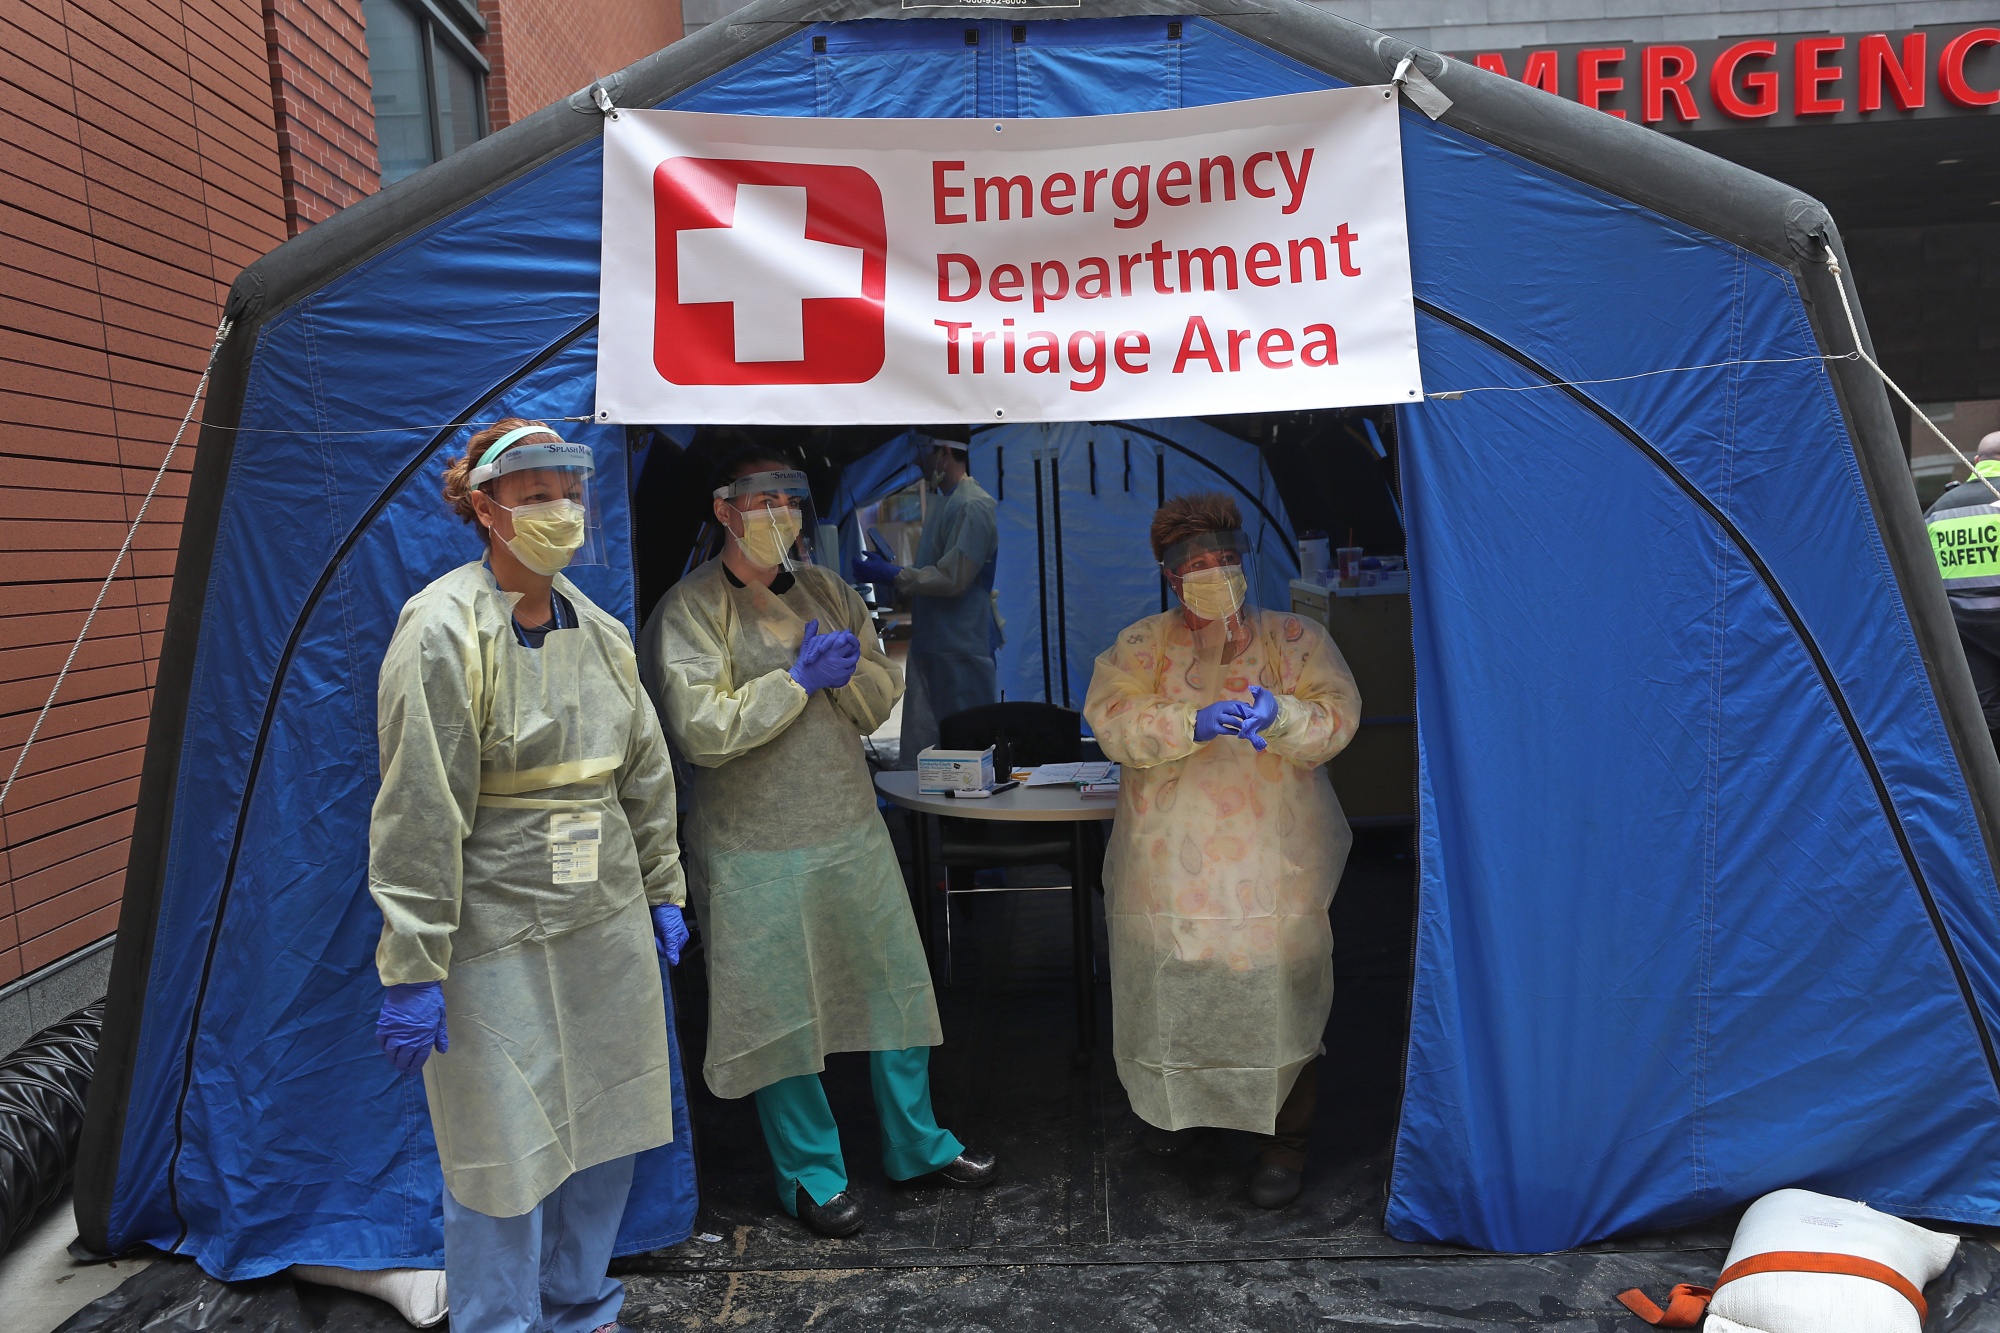 Nurses at Boston Medical Center’s Emergency Department Triage Area, on March 20.